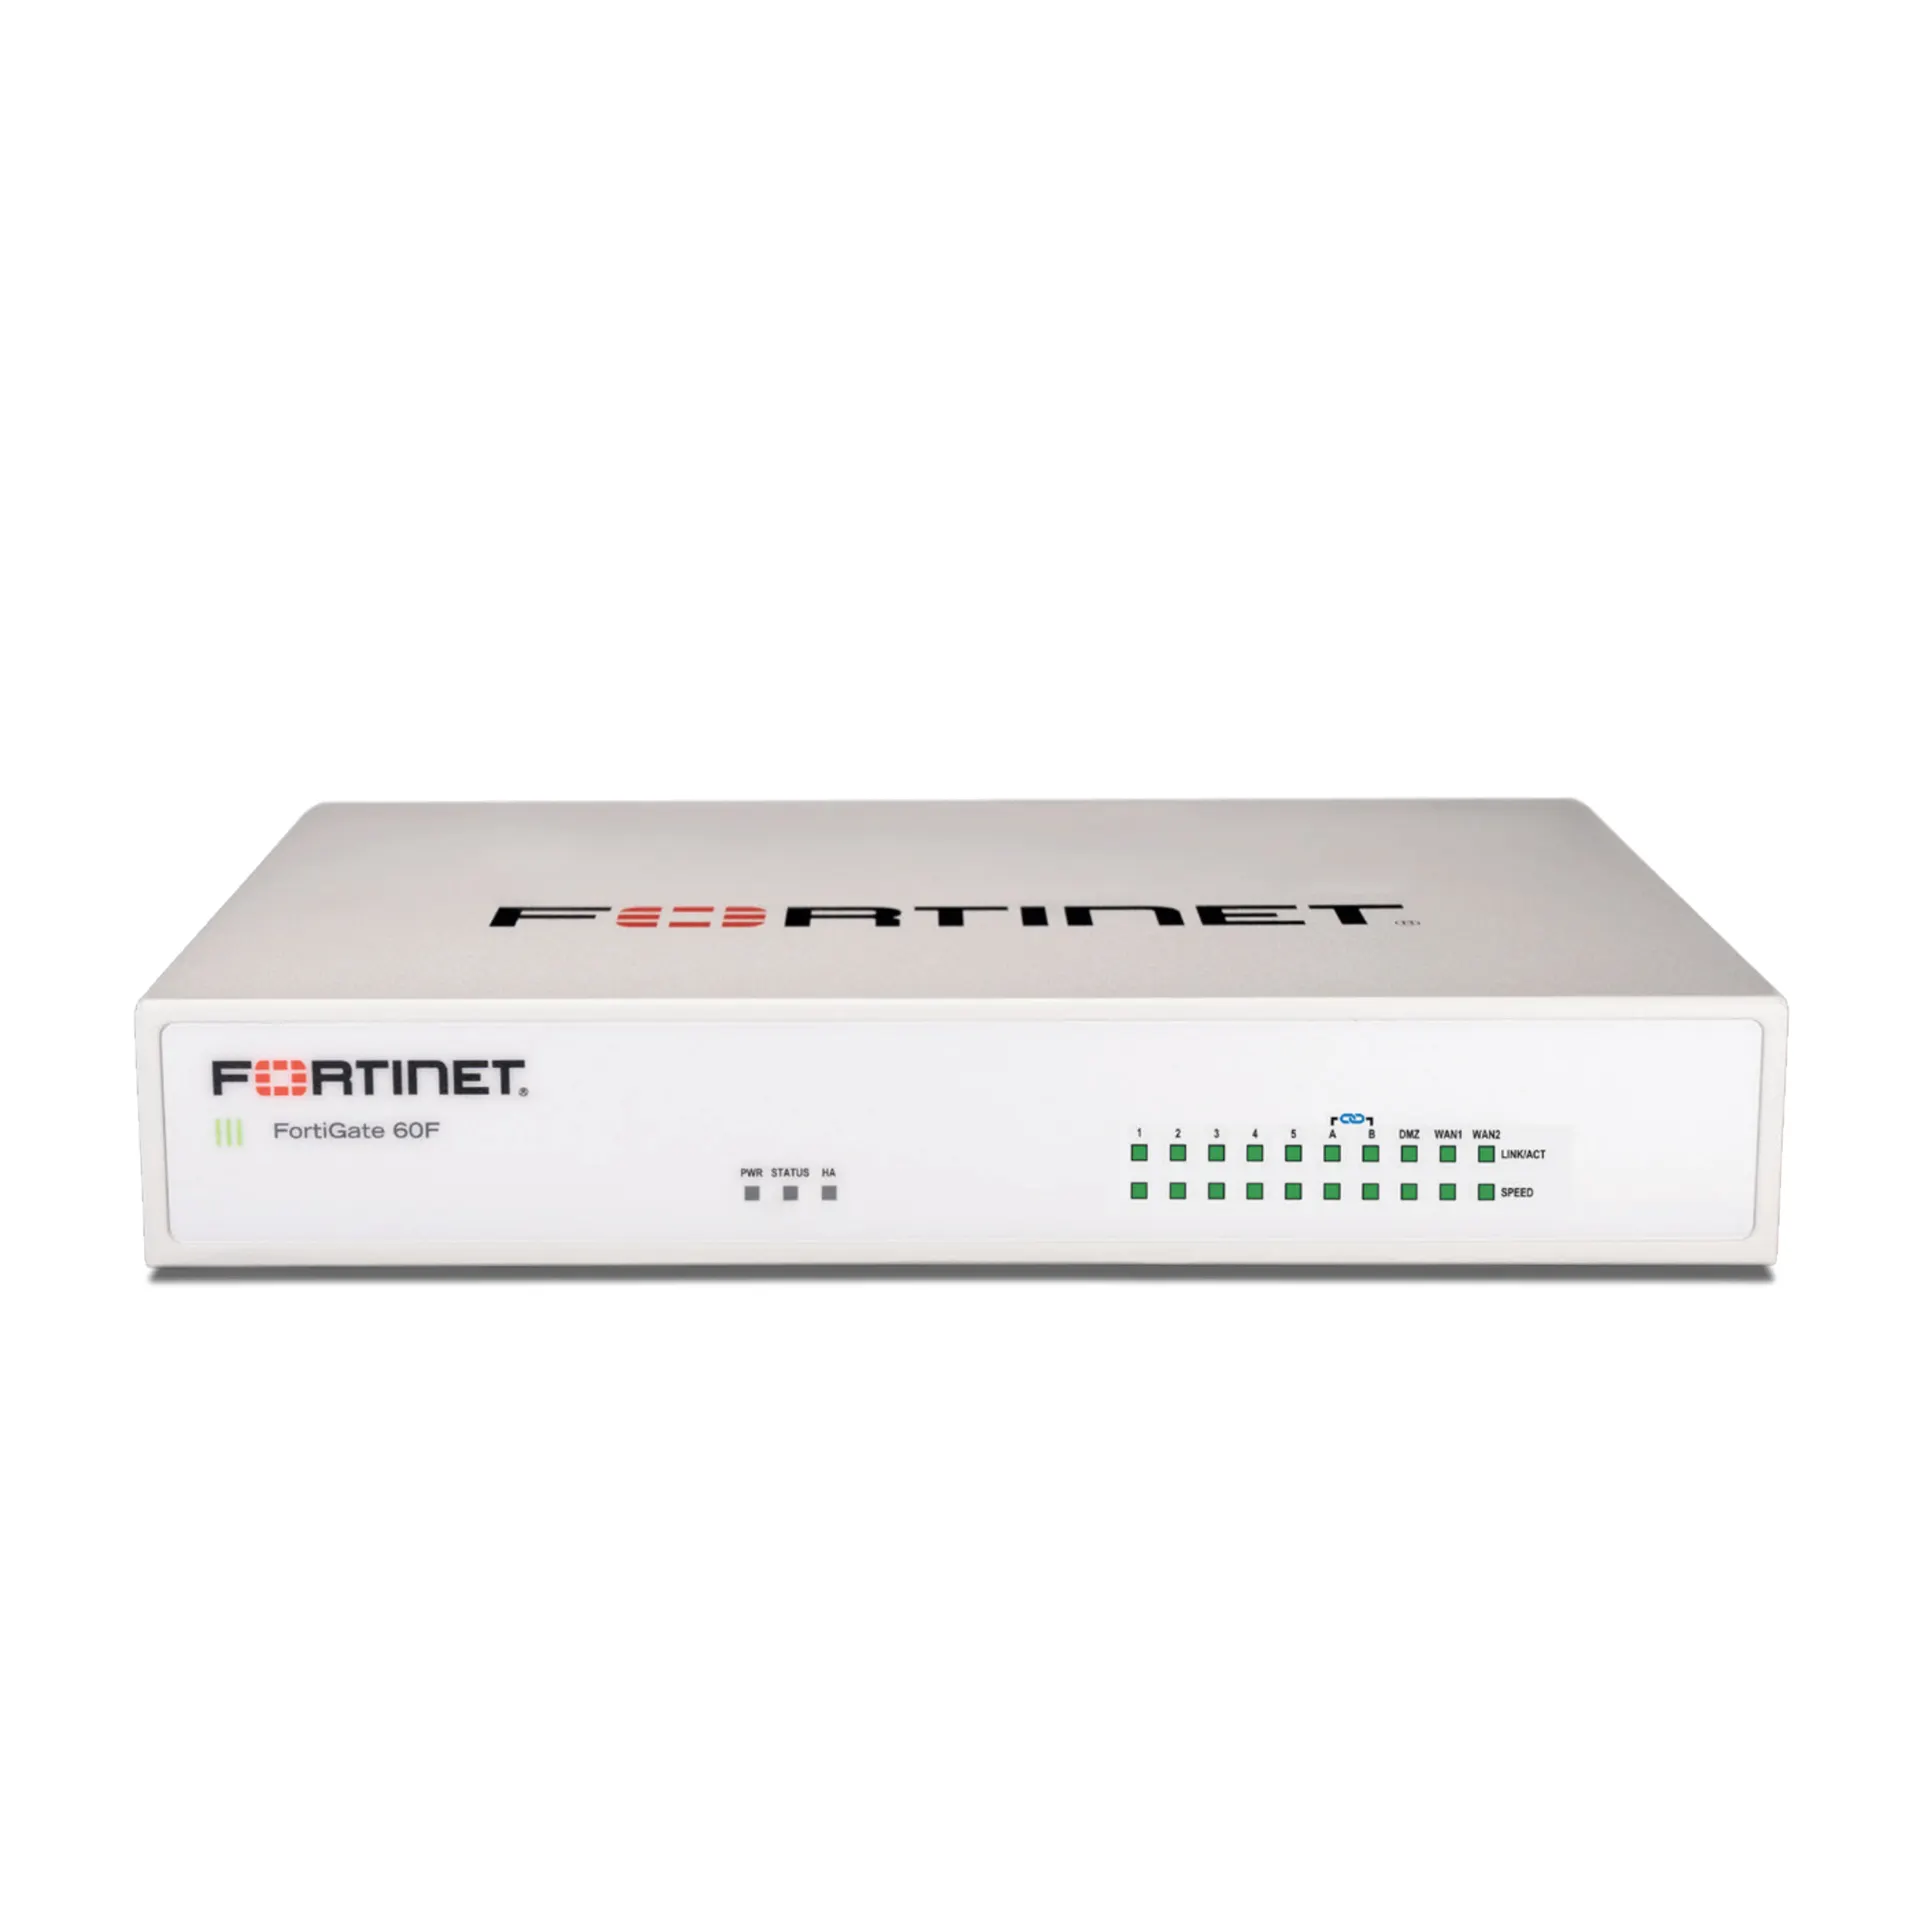 Fortinet Firewall FG-60F-BDL-950-12 FG-60F Fortigate 60F and Software License Unified Threat Protection  UTP  FortiCare